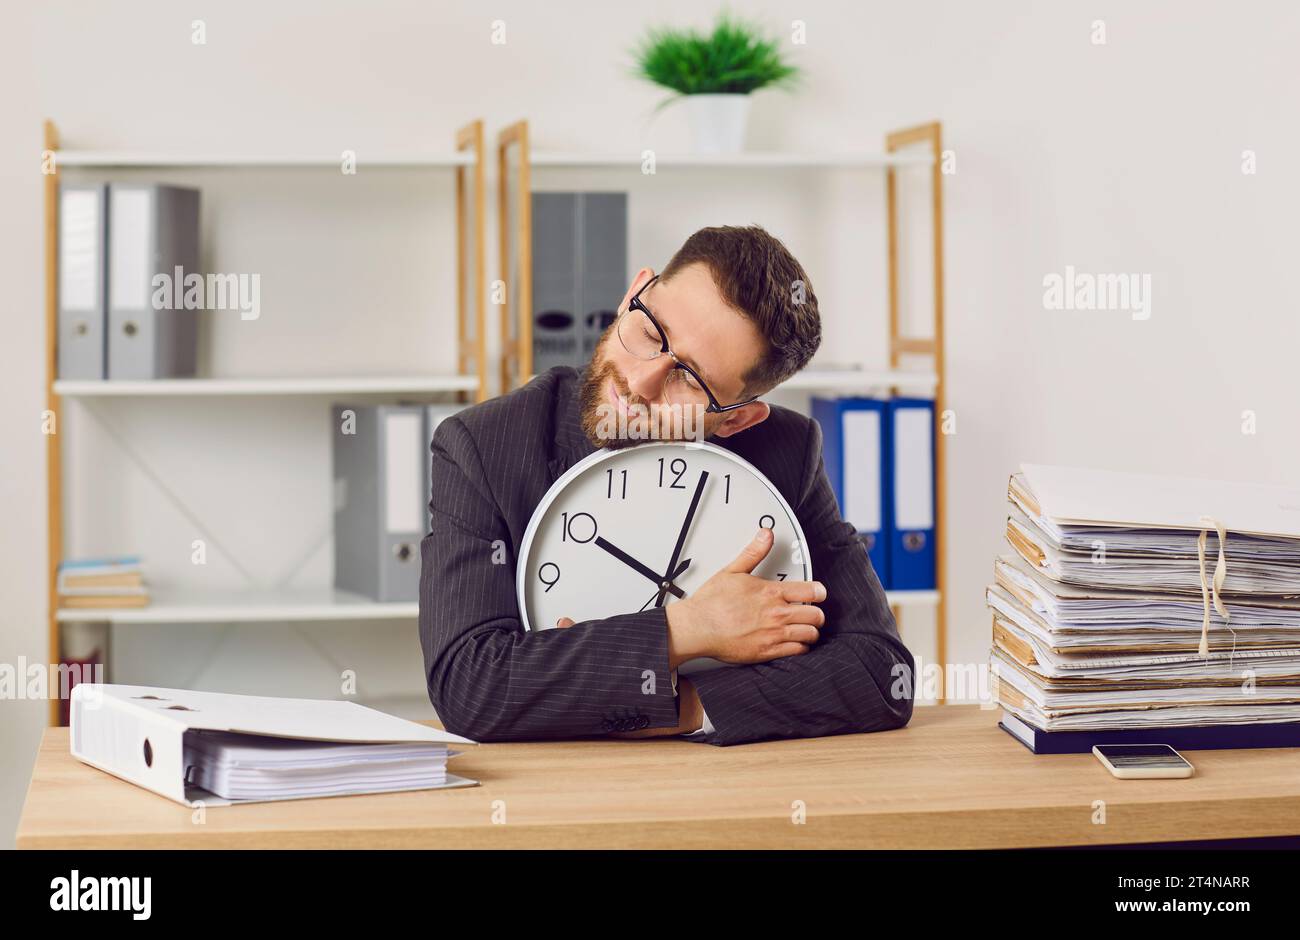 Tired, overworked office worker sitting at desk with paperwork, holding clock and sleeping Stock Photo